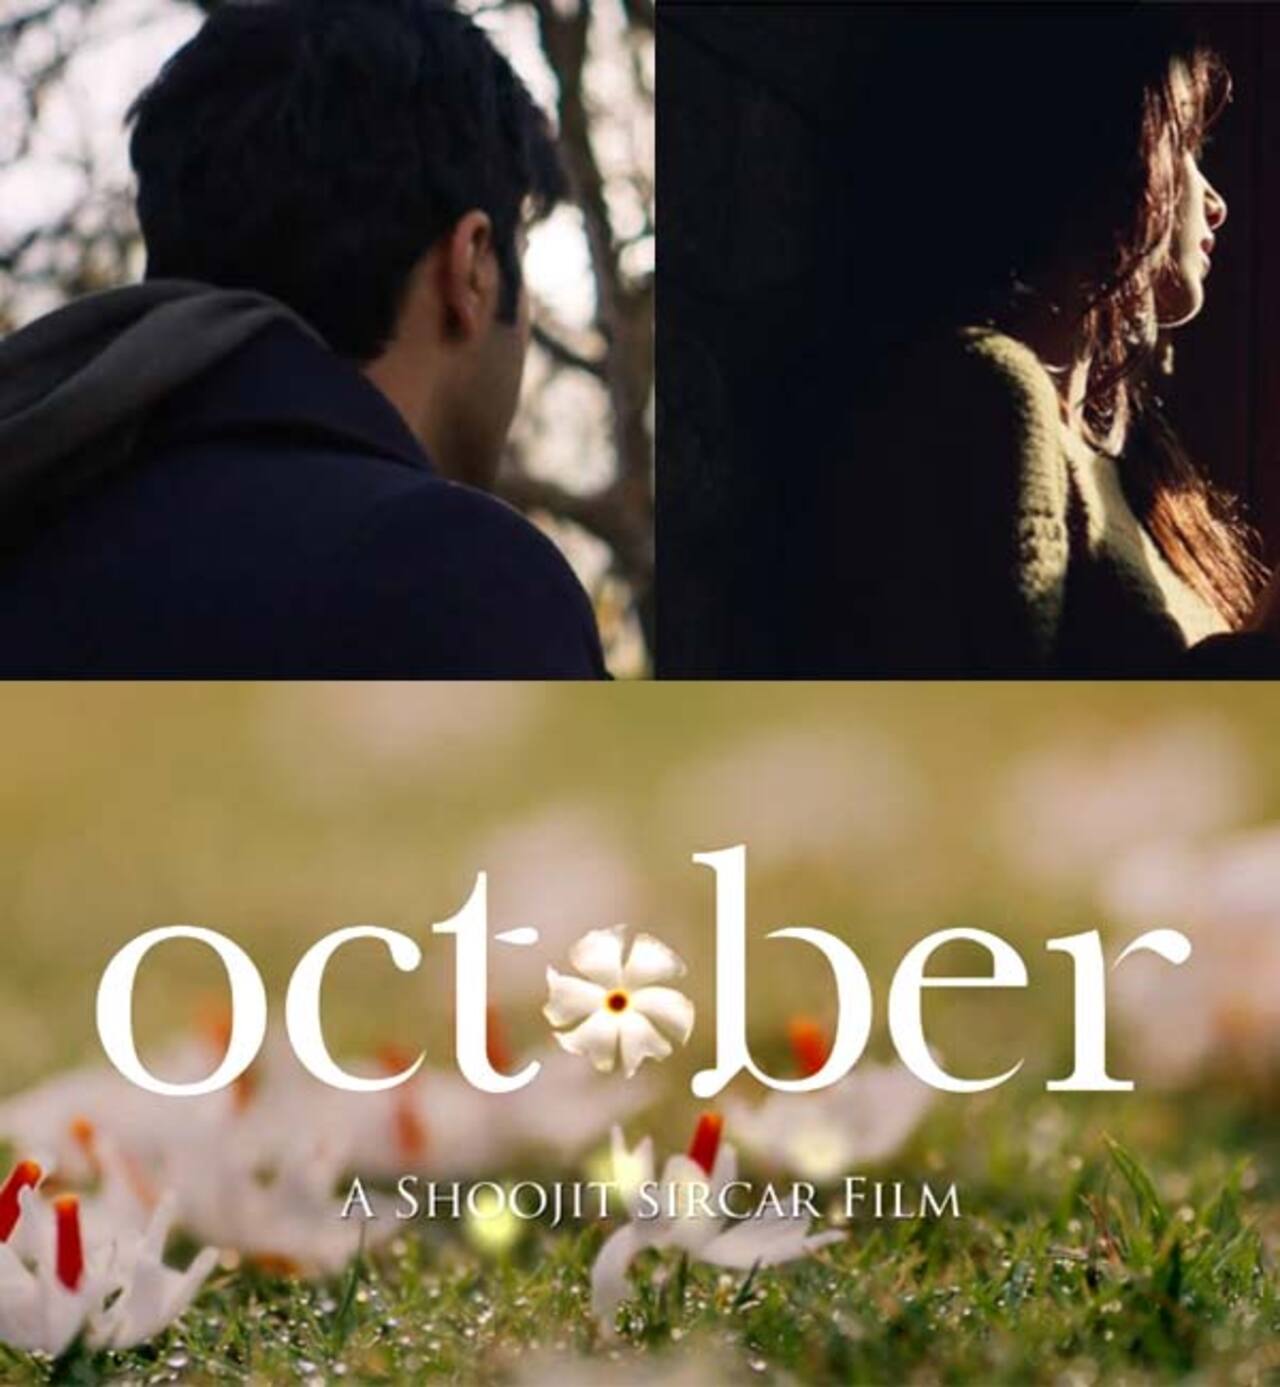 World of October: 3 beautiful shots of Varun Dhawan and Banita Sandhu is all it takes for us to fall in love all over again - watch video